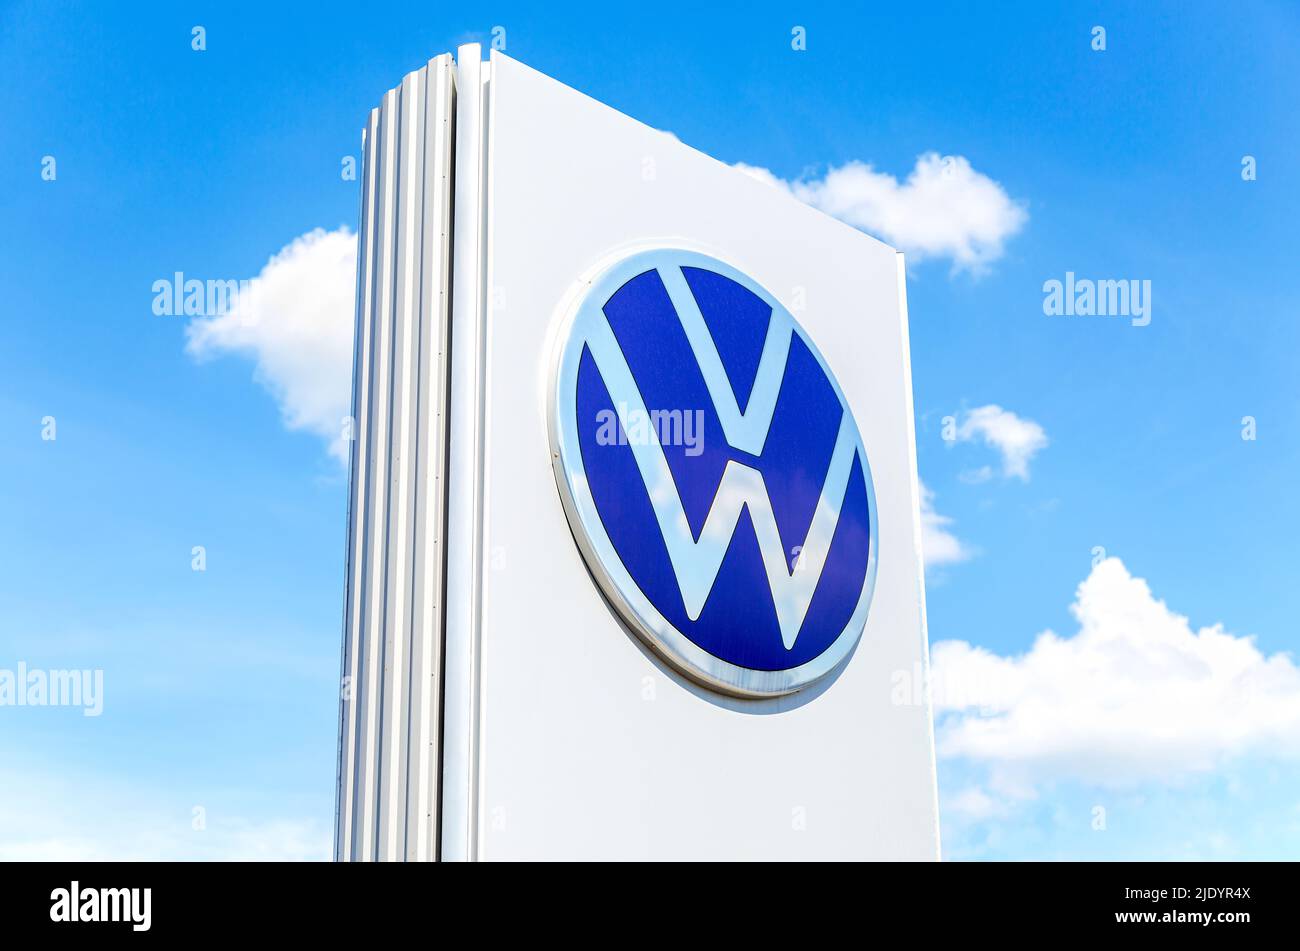 Samara, Russia - June 18, 2022: Dealership sign with the logo of Volkswagen against the blue sky. Volkswagen is the biggest German automaker Stock Photo